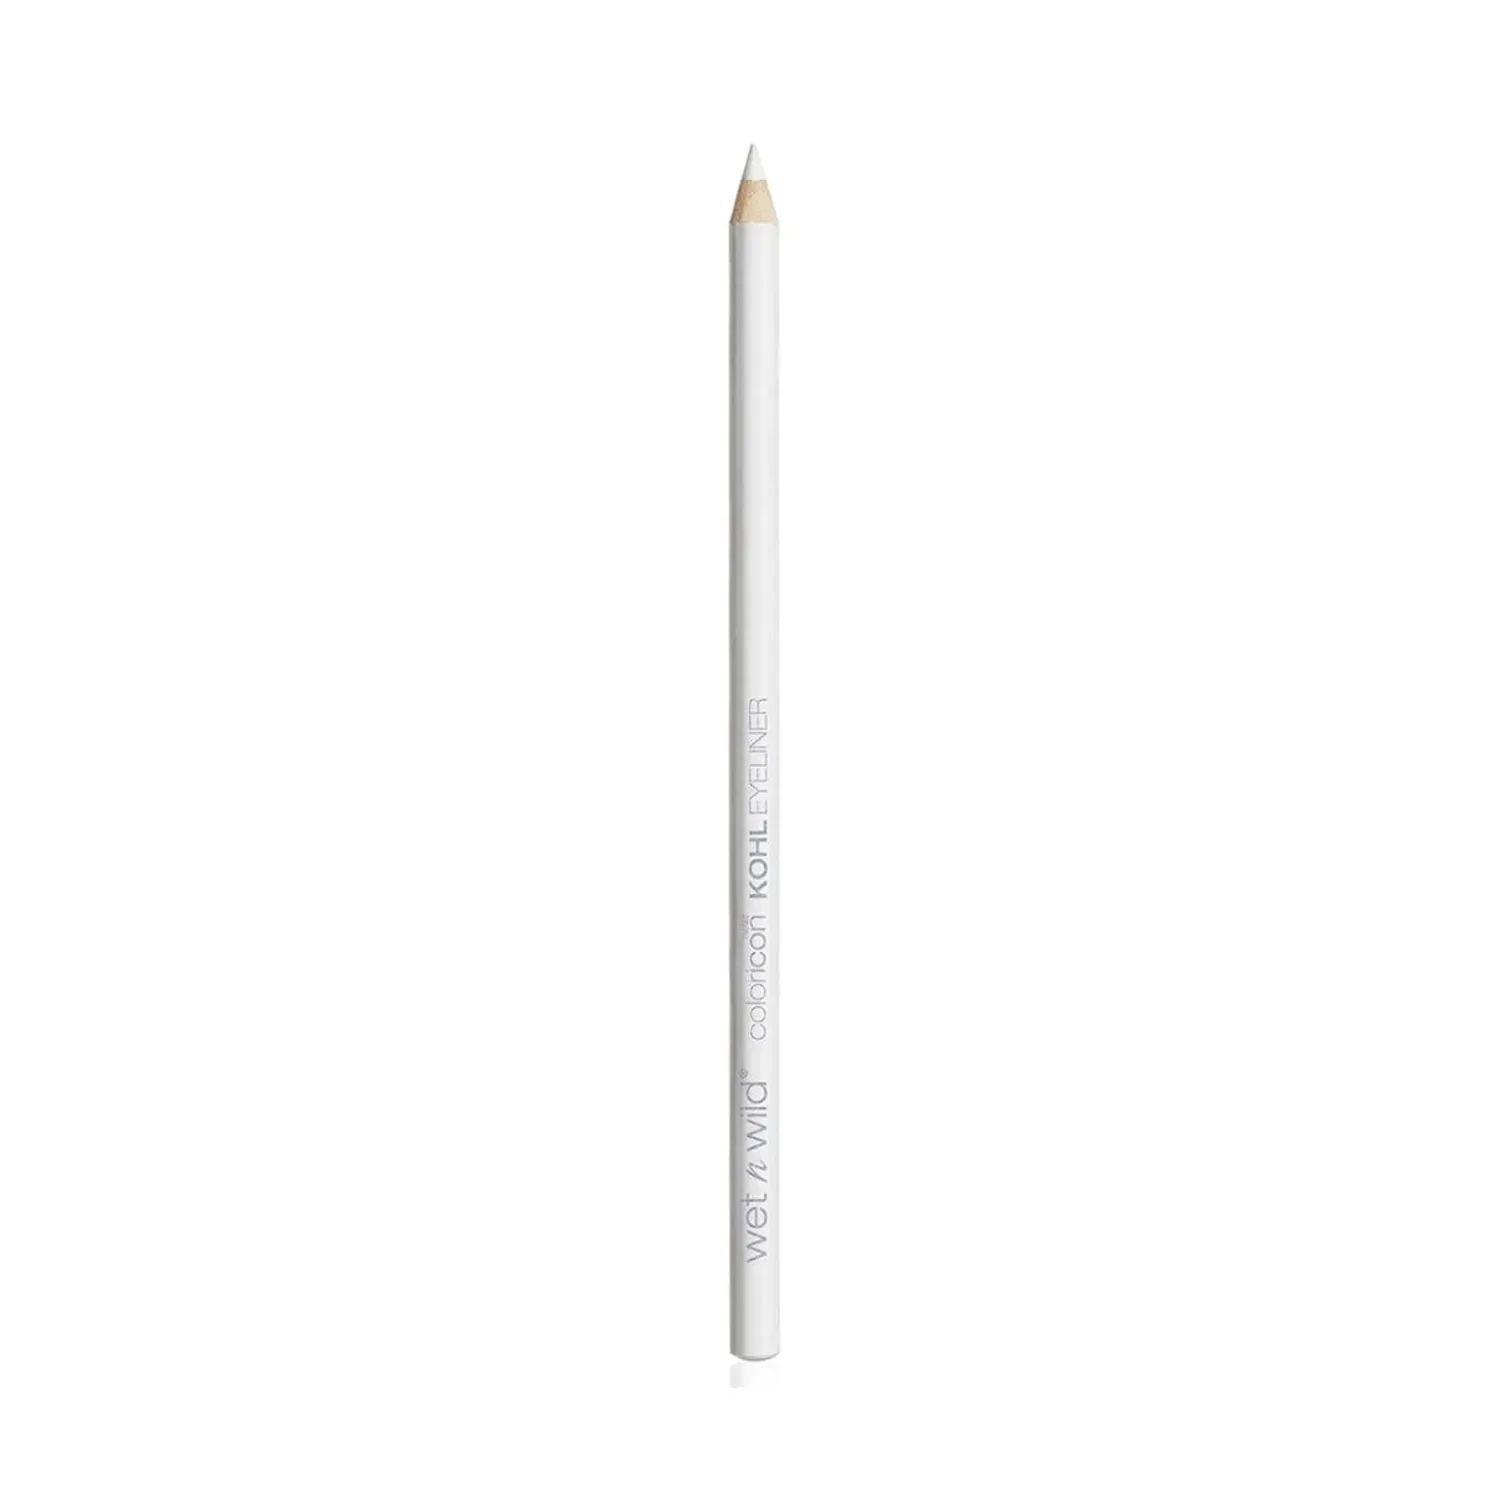 Wet n Wild | Wet n Wild Color Icon Kohl Liner Pencil - You'Re Always White (1.4g)